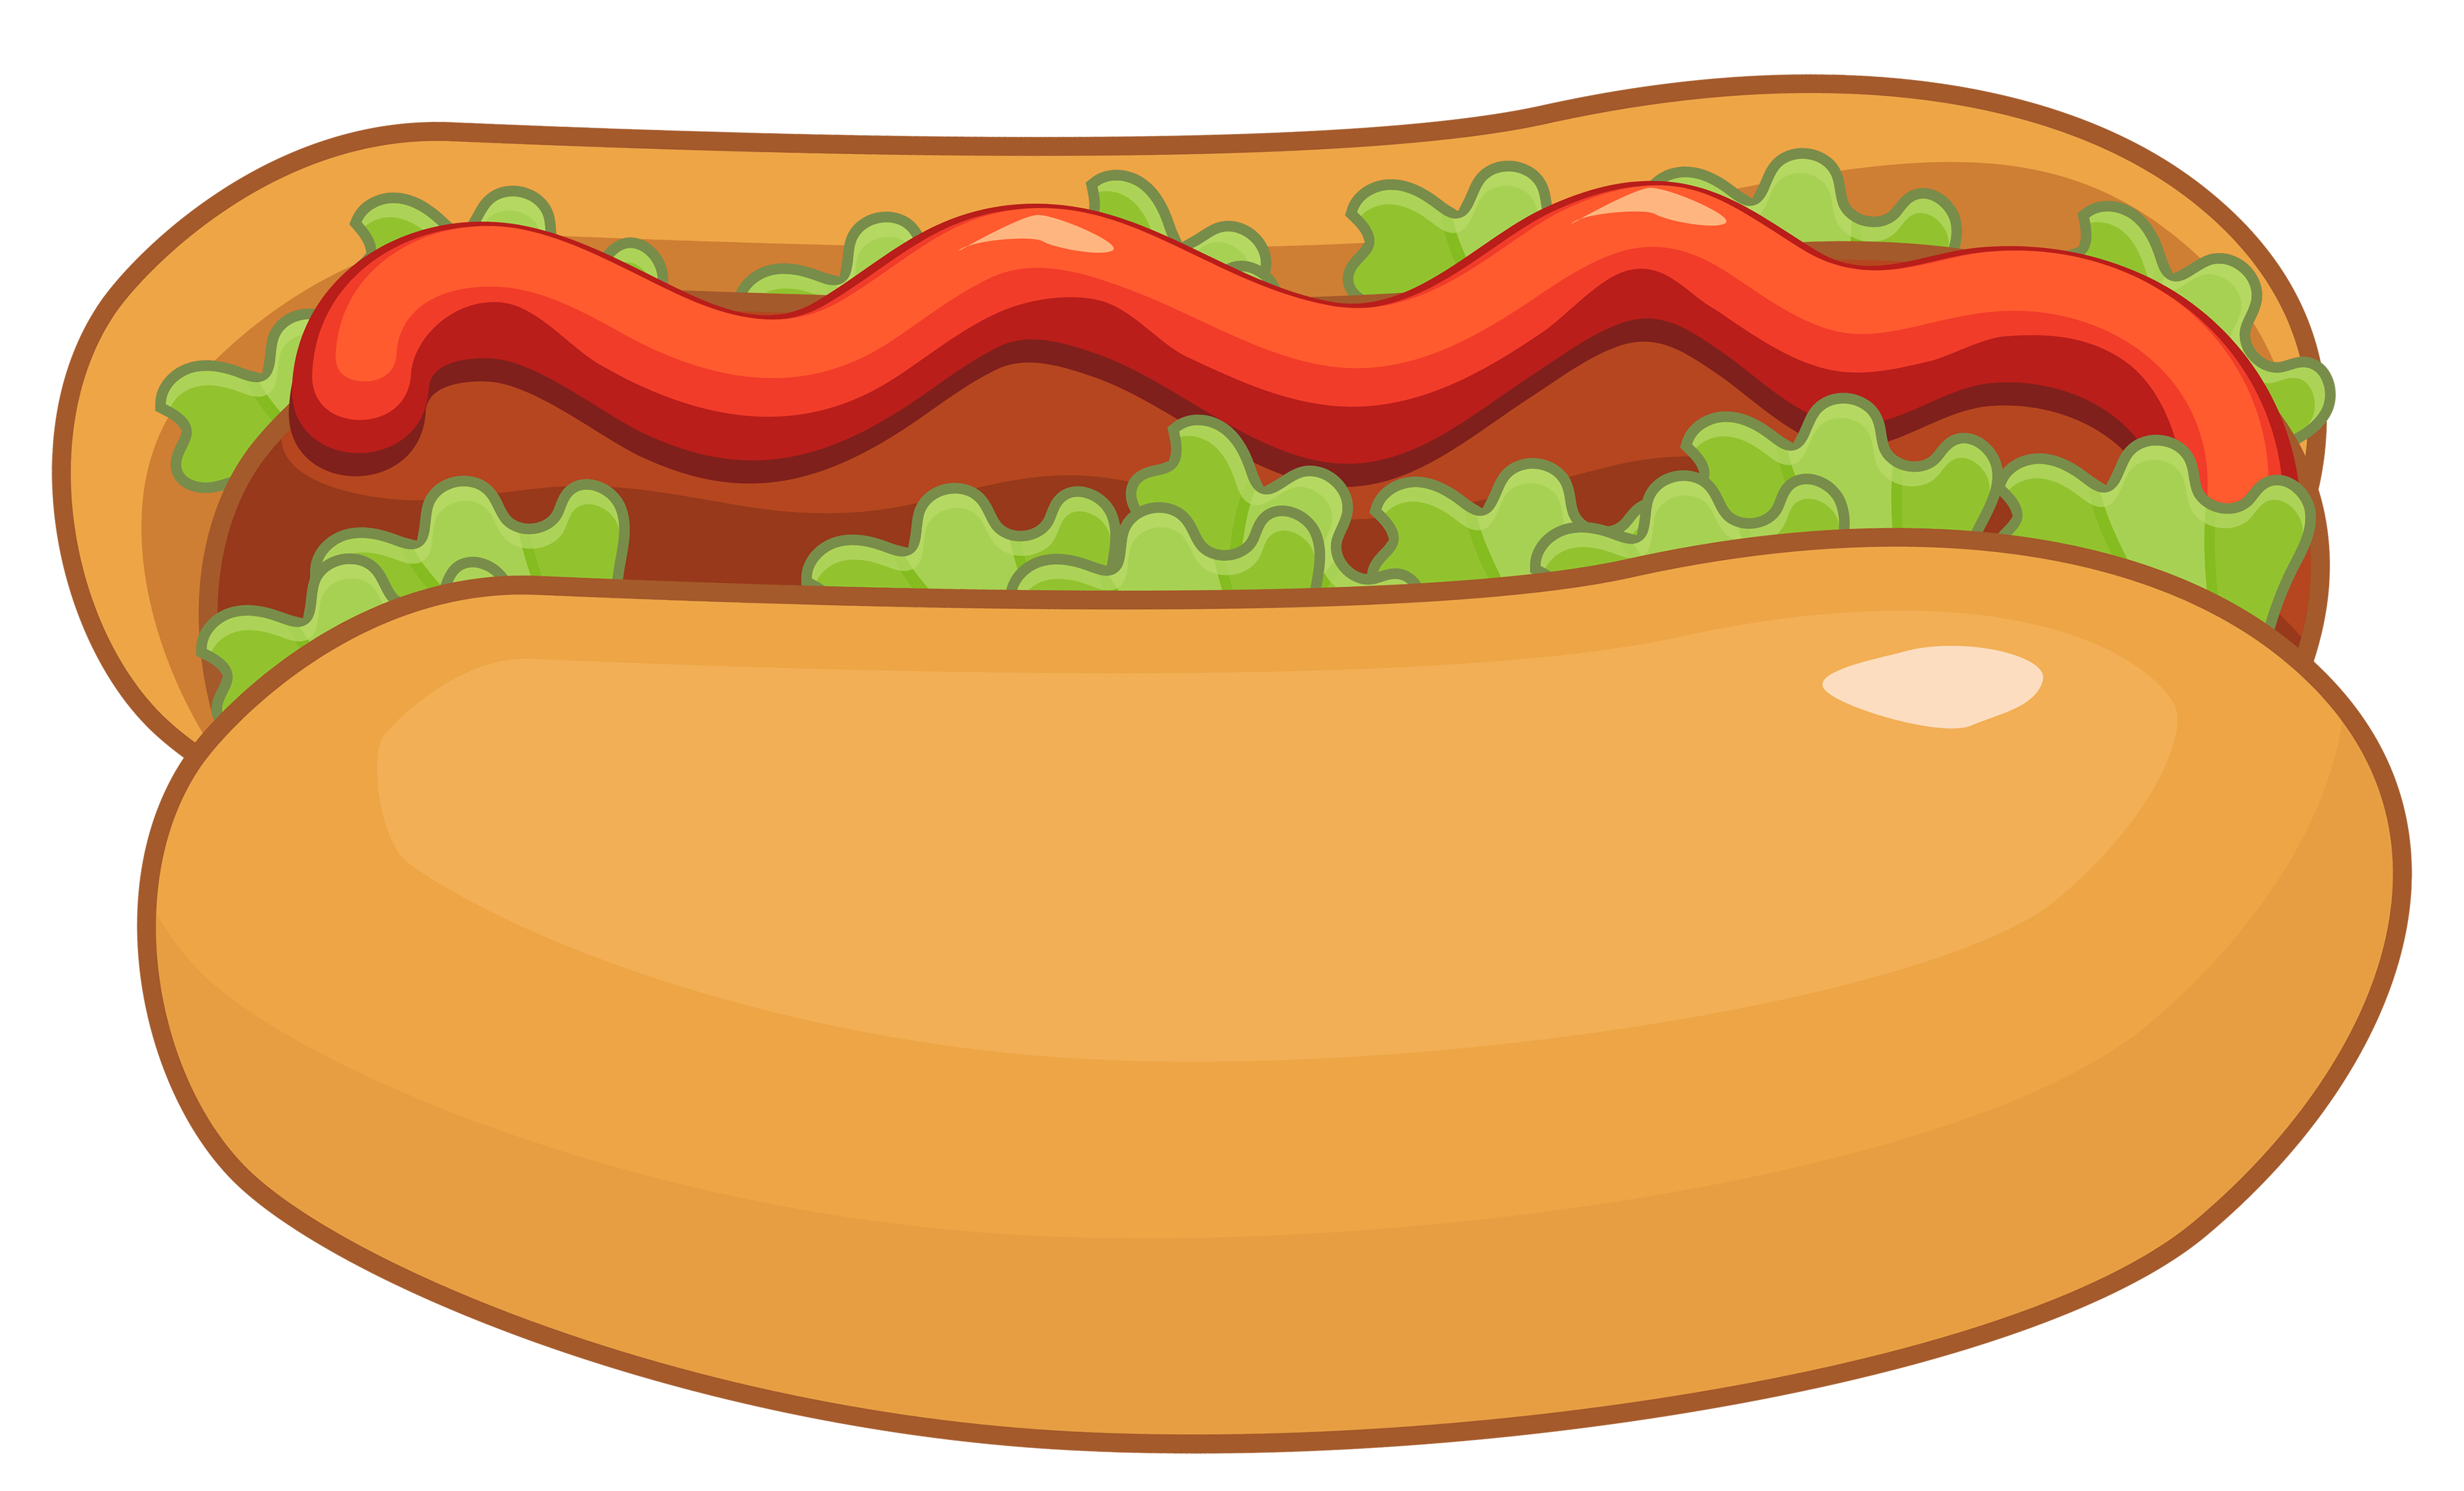 free clipart images of hot dogs - photo #7